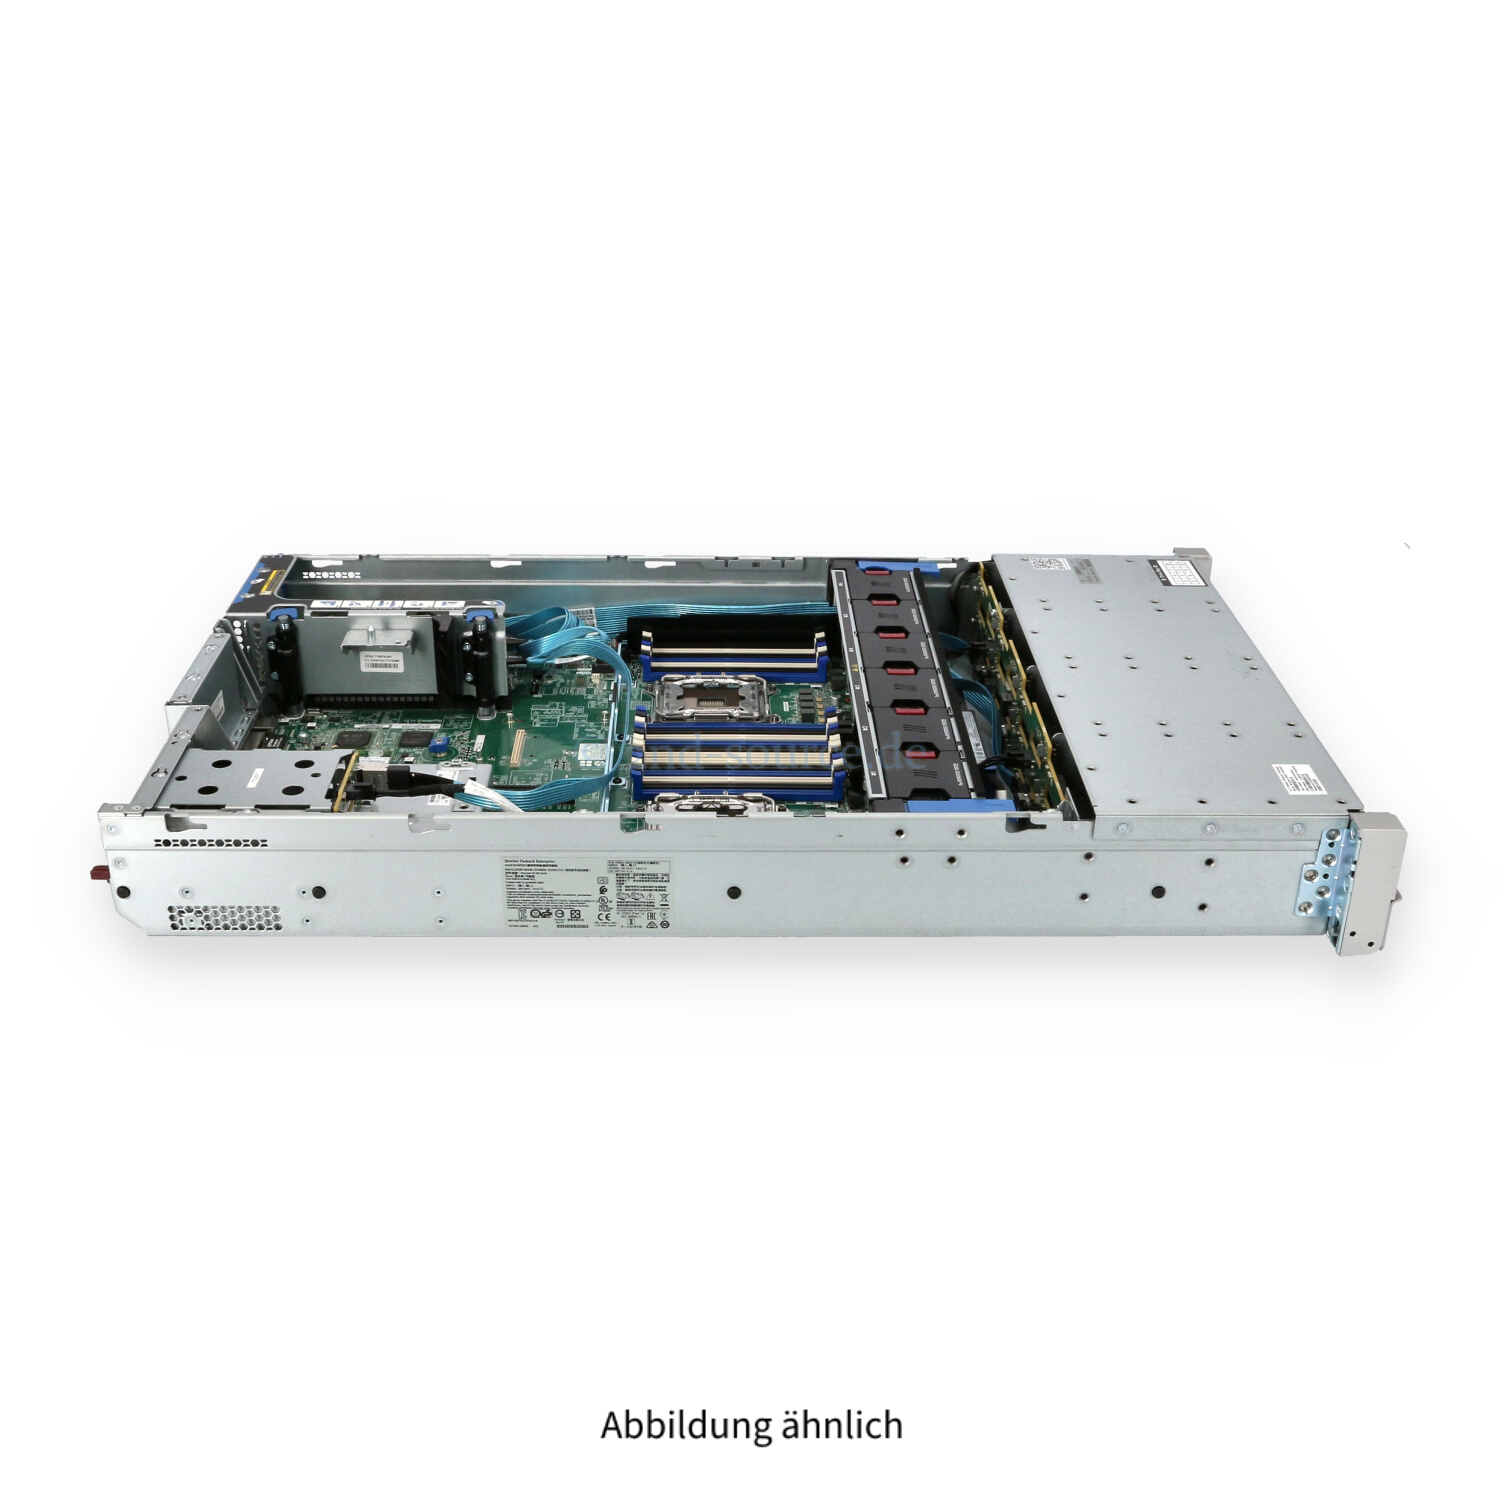 HPE DL380 G9 12xLFF 2xSFF P840/4GB 2x1400W CTO Chassis 719061-B21